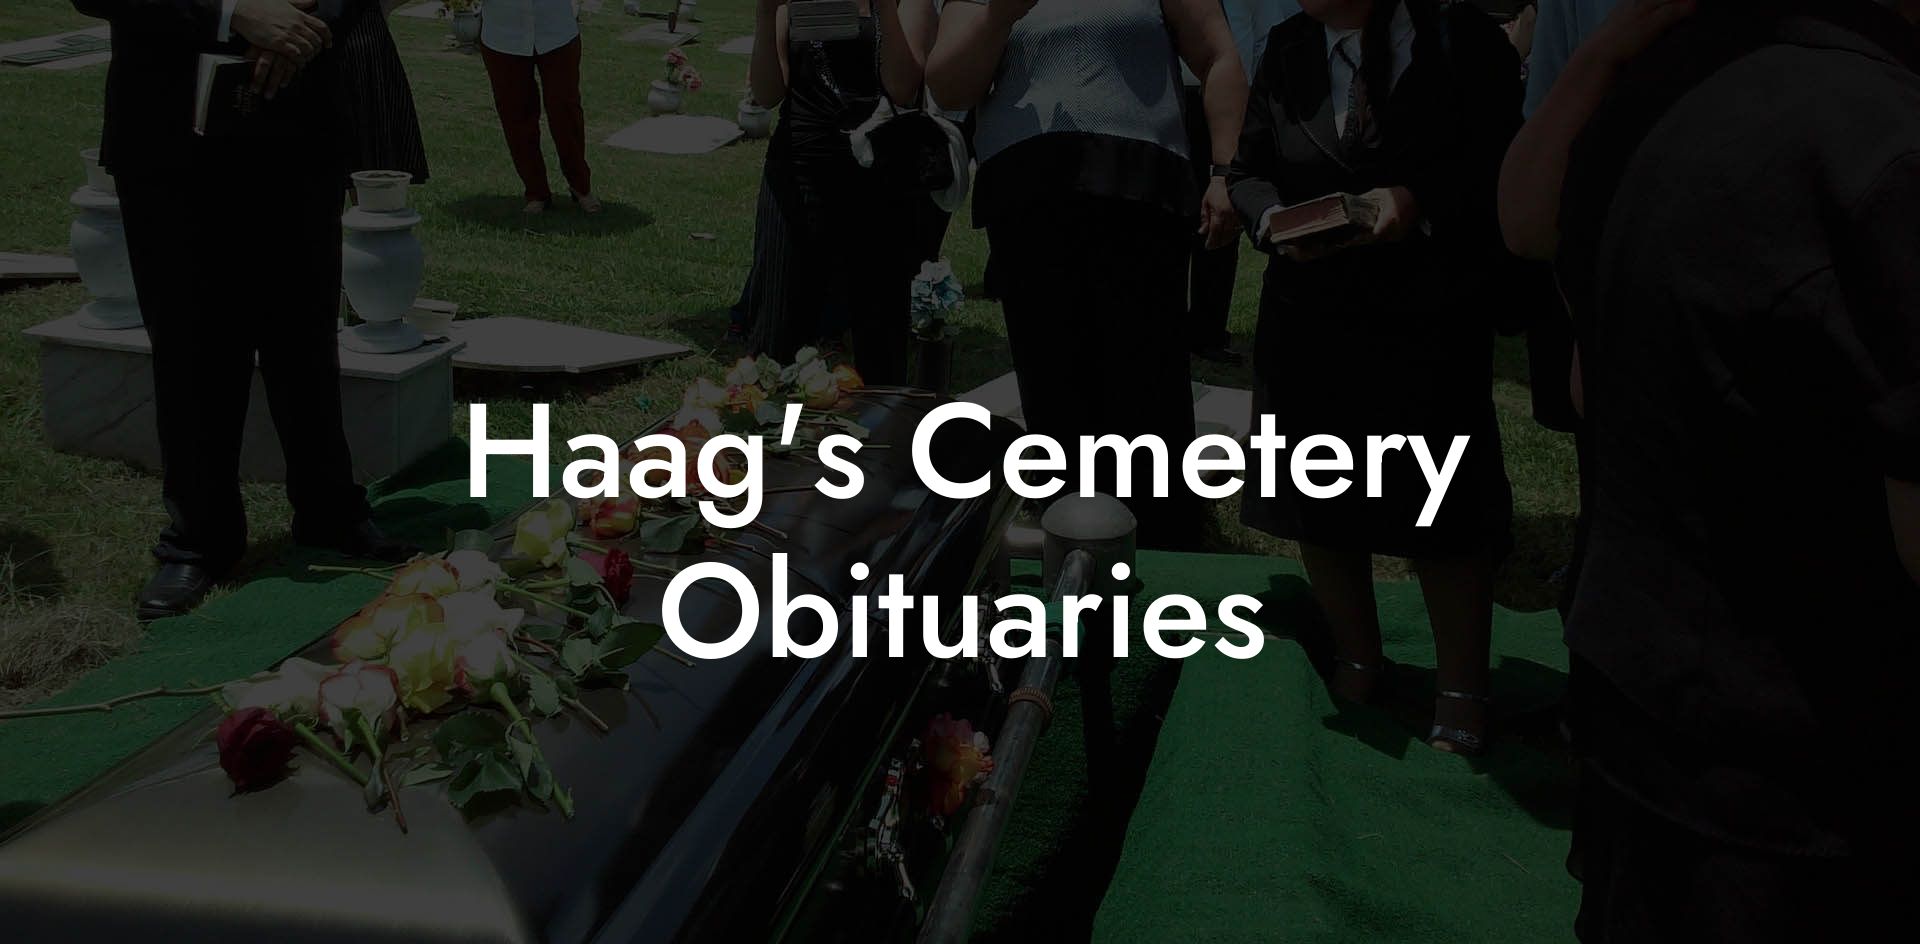 Haag's Cemetery Obituaries